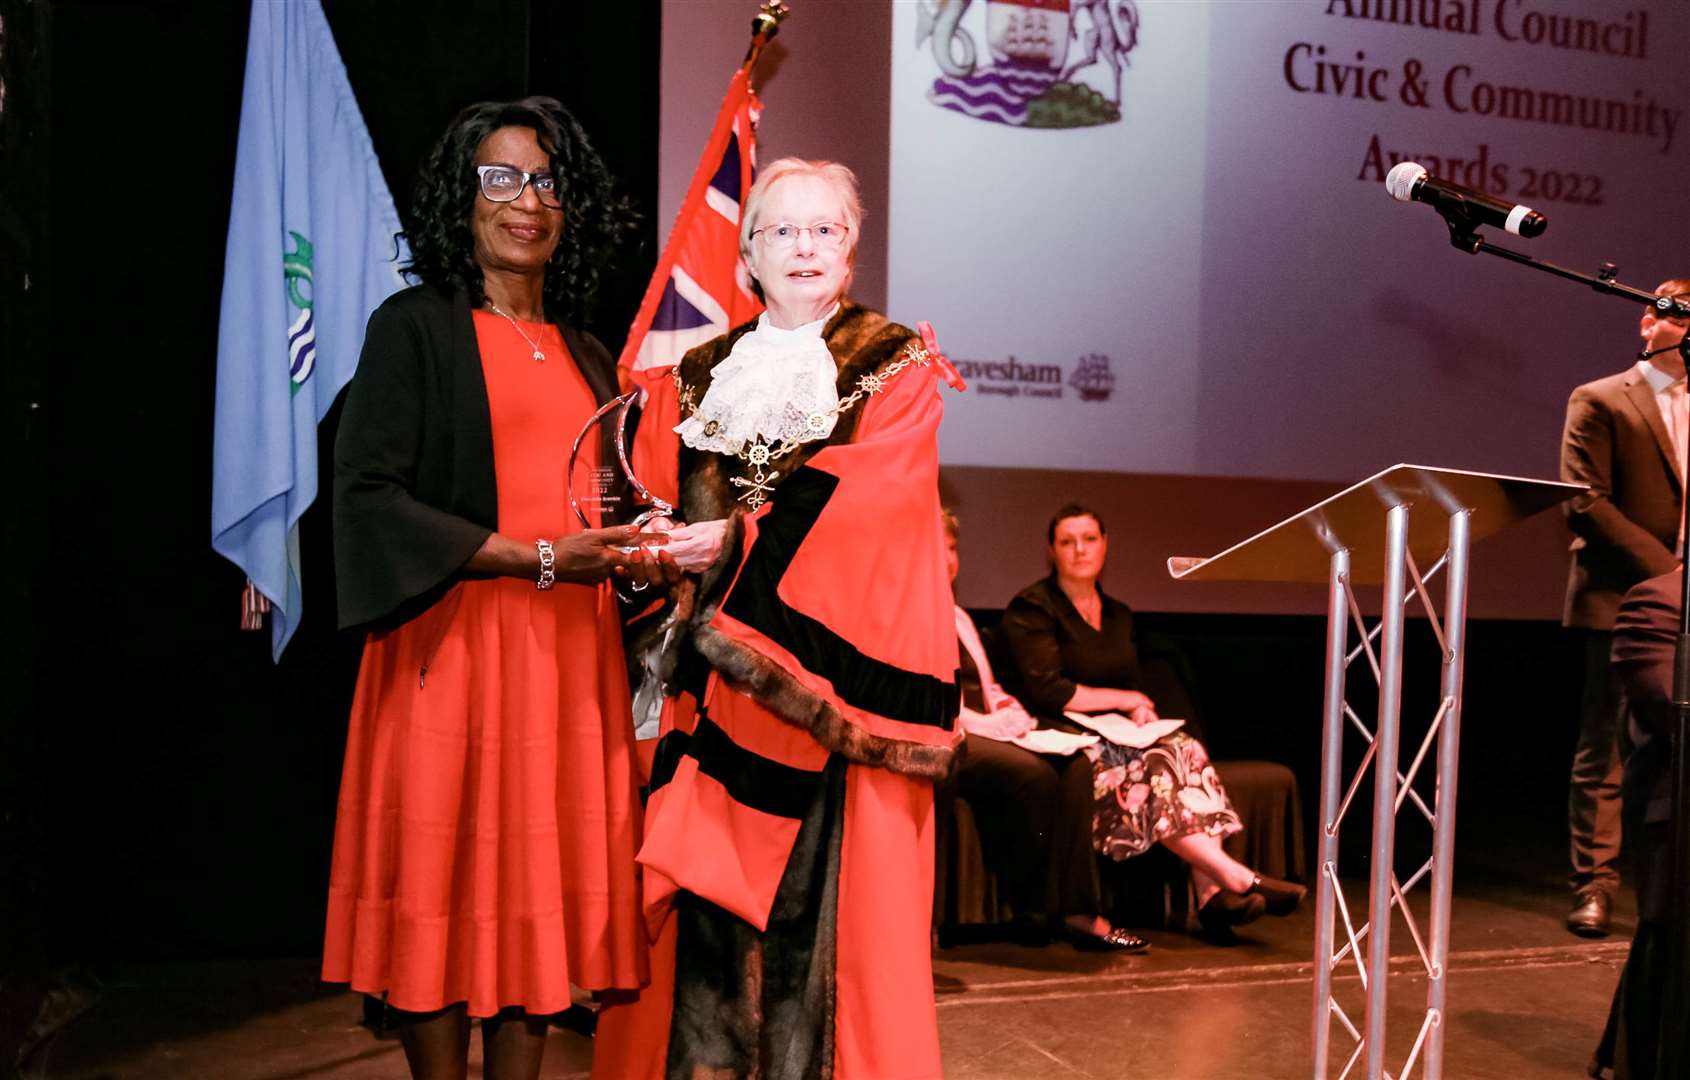 Claudette Bramble, left, with the outgoing Mayor of Gravesham, Cllr Lyn Milner. Photo: Gravesham council